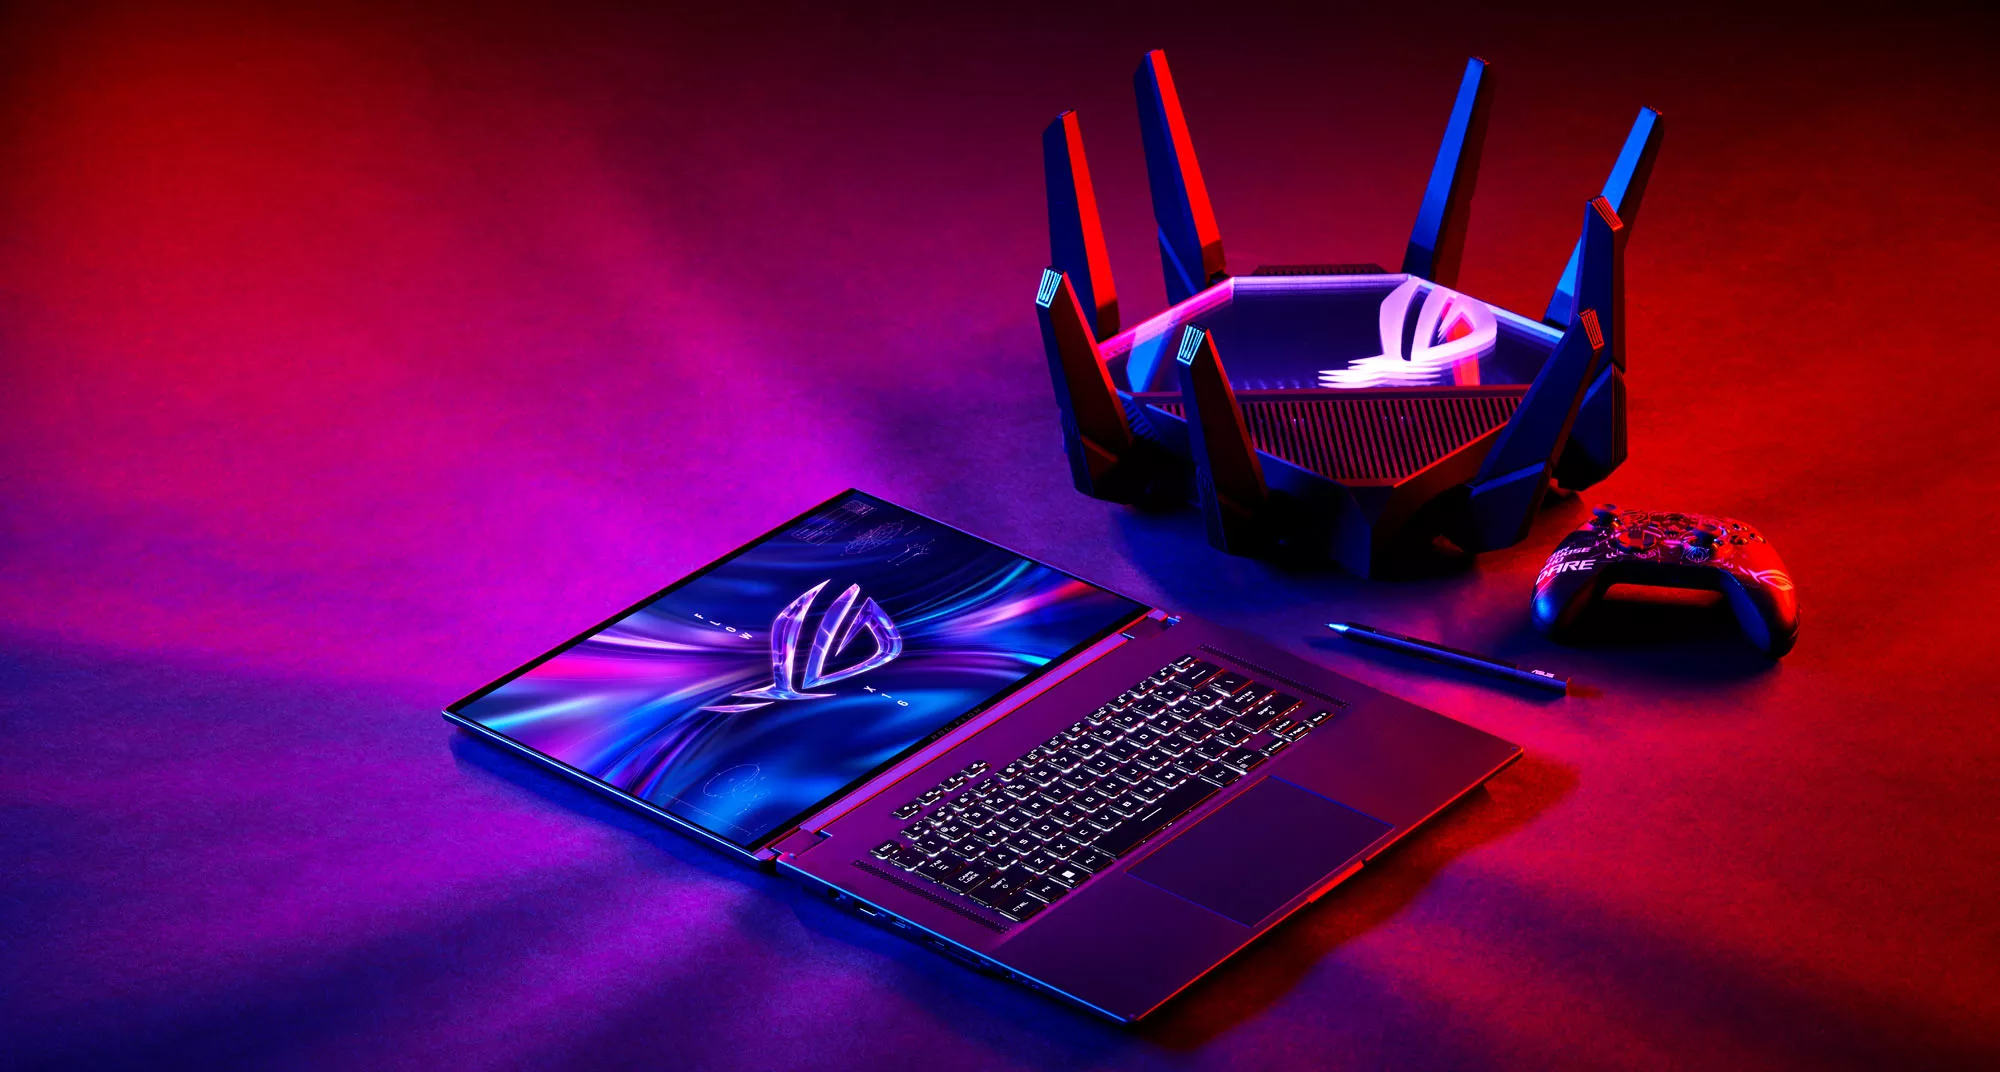 An image of the ROG Flow X16 laptop laid out on a table next to a wireless router and mouse.